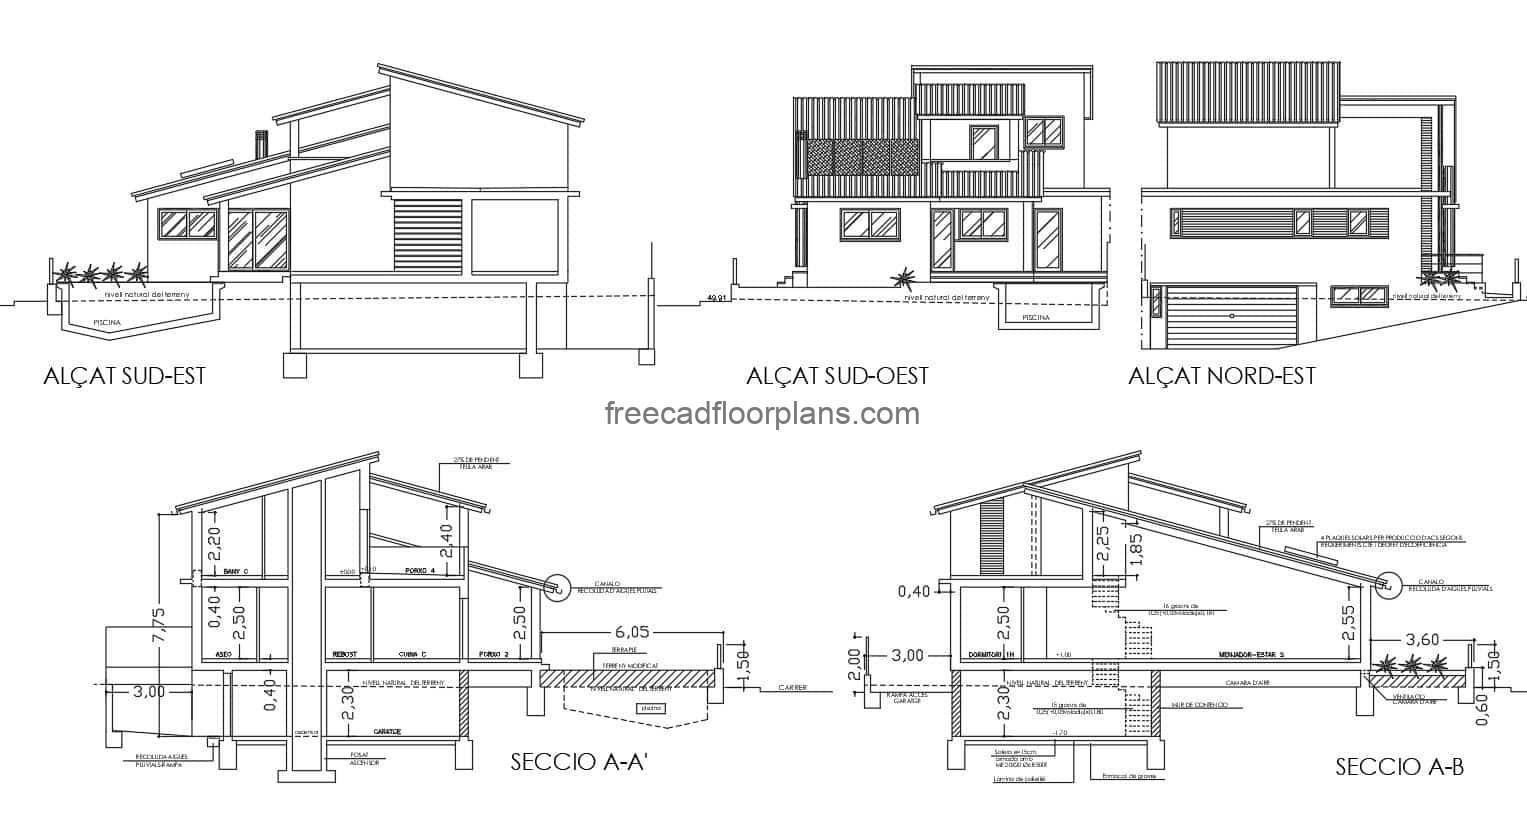 Complete preliminary plans for a two-storey residence with a modern style and a basement for vehicle parking. The residence has sloping roofs, three rooms in the second level area and social area in the first level. Complete set of plans in Autocad DWG format, architectural plans, dimensions, elevations, sections, toilets, foundations, for free download. Complete editable blueprints.